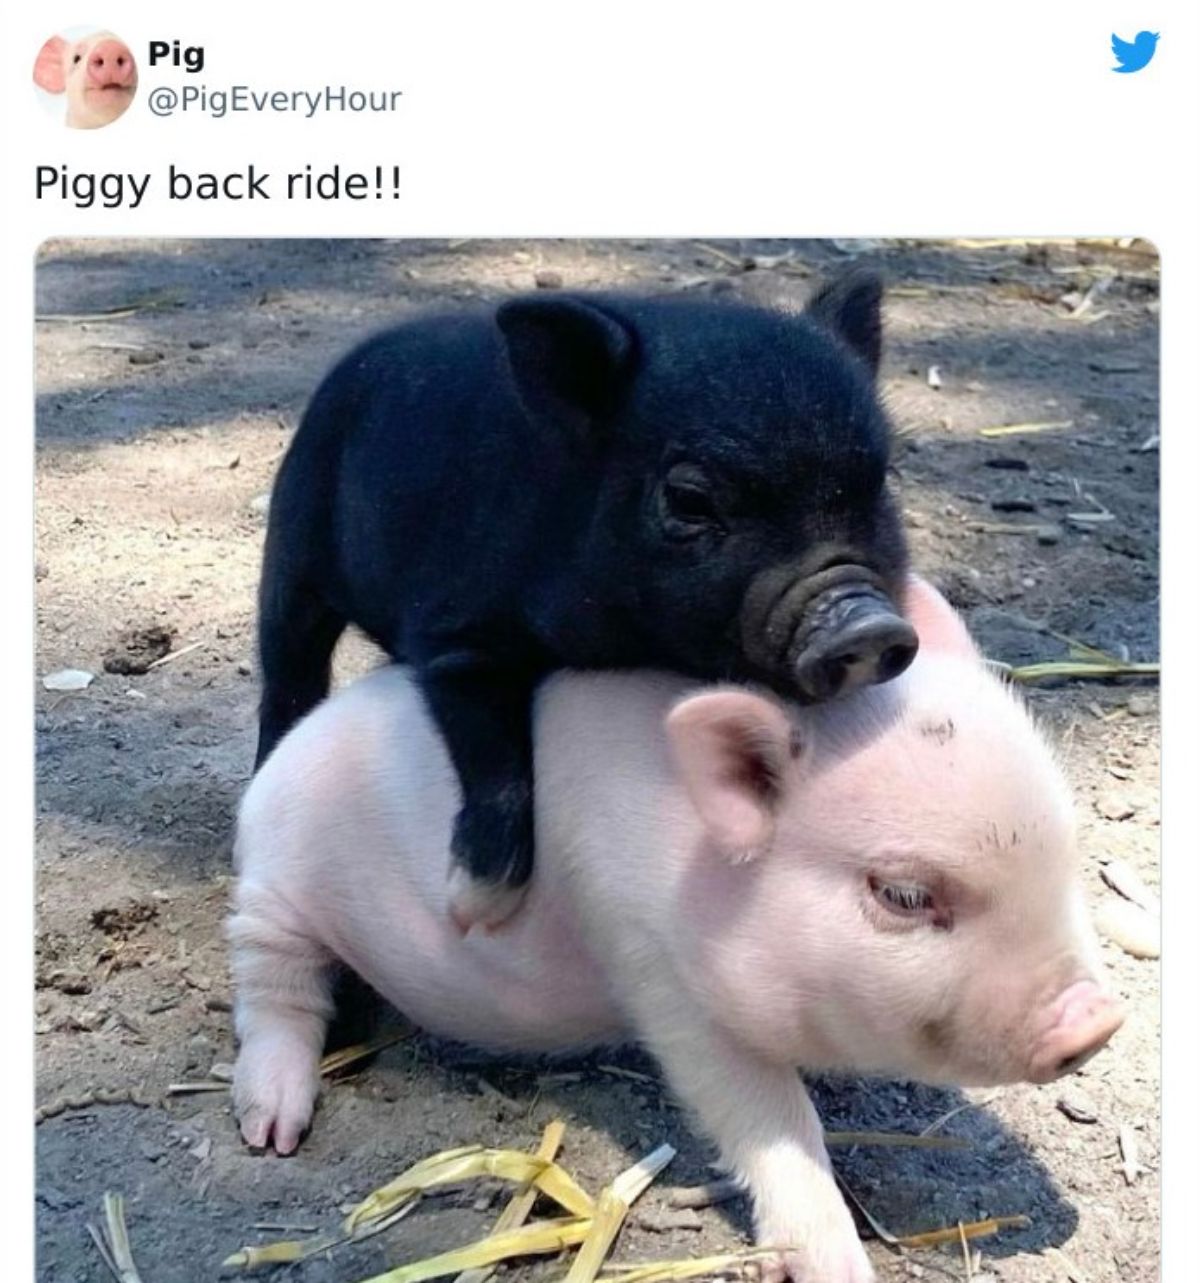 tweet with a photo of a black piglet on the back of a white piglet